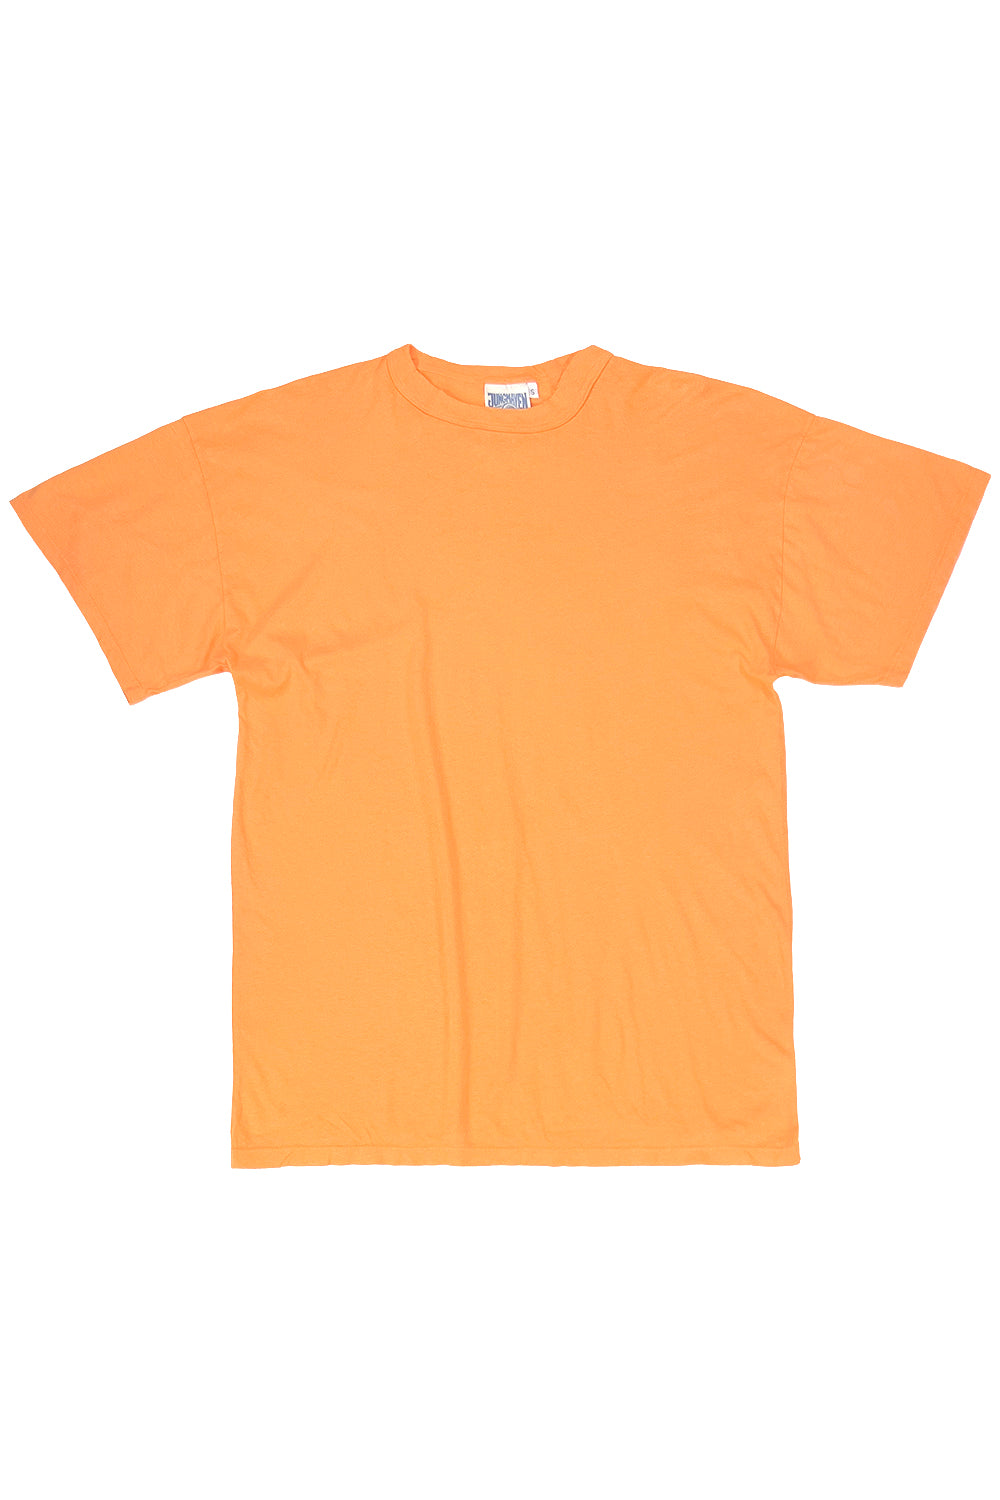 Index Tee | Jungmaven Hemp Clothing & Accessories / Color: Apricot Crush